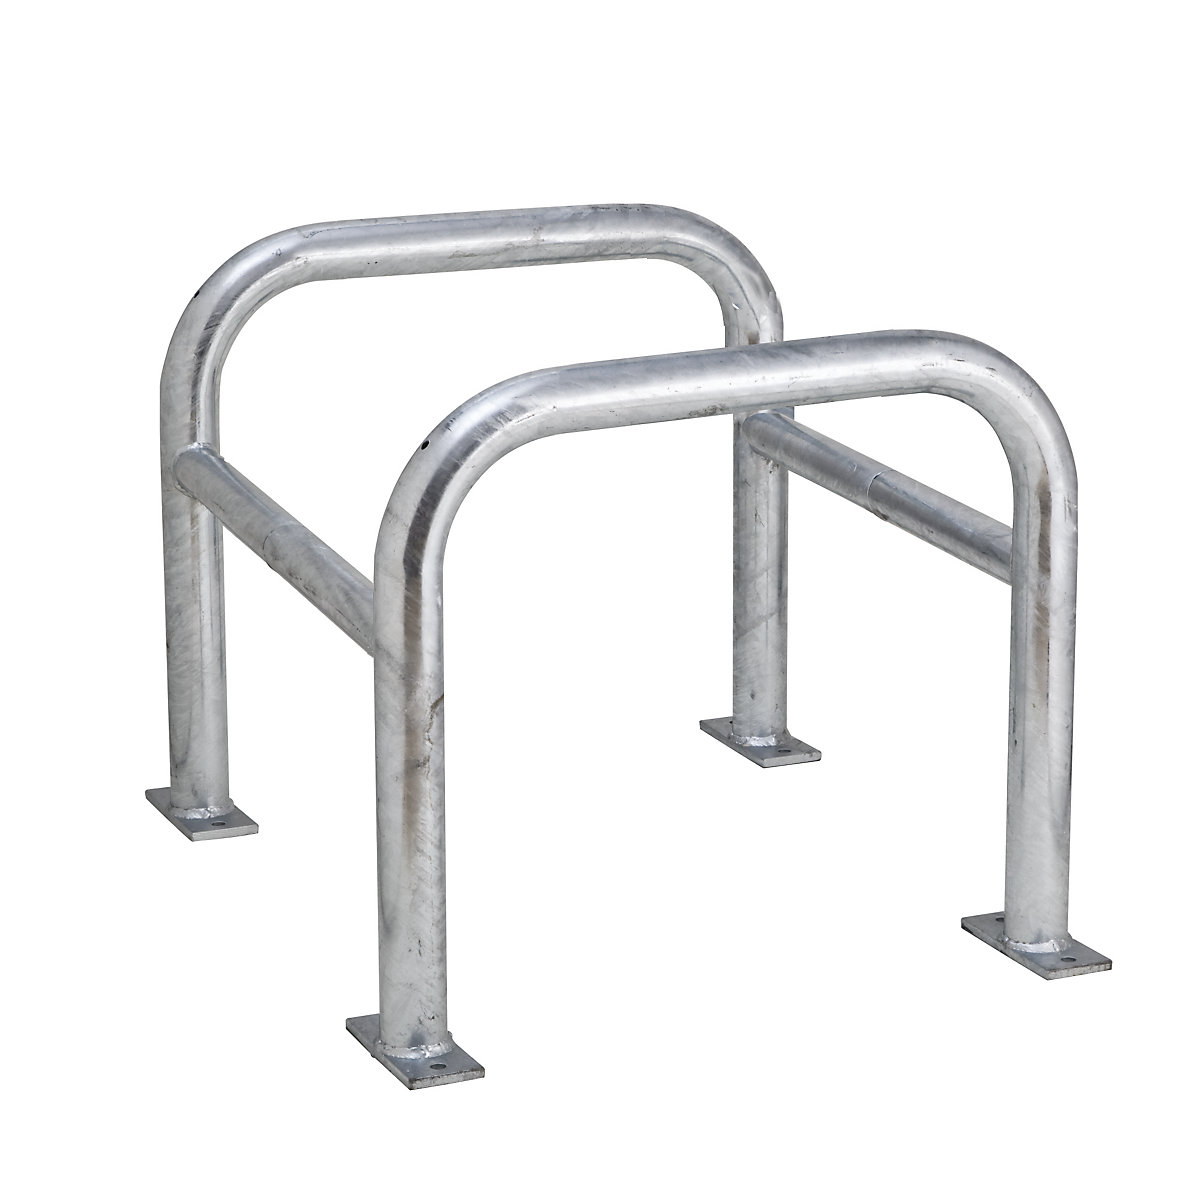 Crash protection for posts, zinc plated, HxWxD 600 x 720 x 720 mm-2